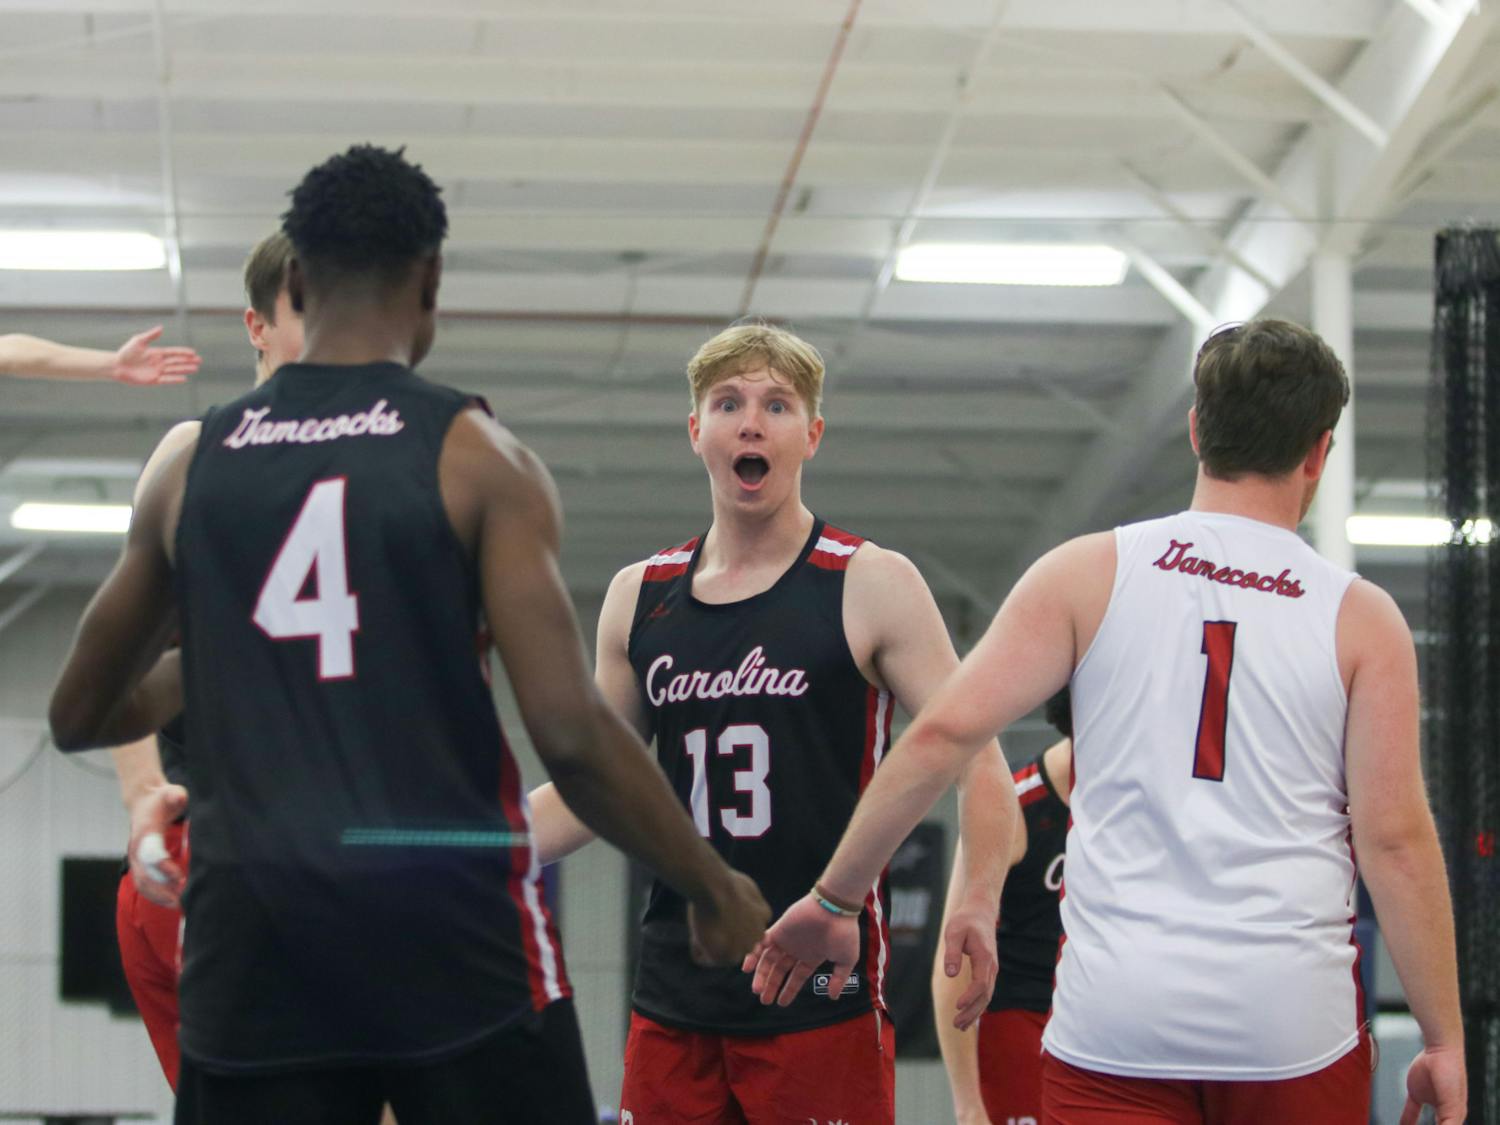 Sophomore setter Ryan Everding looks out in shock as the Garnet team scored an unexpected point during pool play. This particular match against Kennesaw State B was a hard fight until the end, with the Garnet team losing 29-27, and ultimately splitting the match. &nbsp;